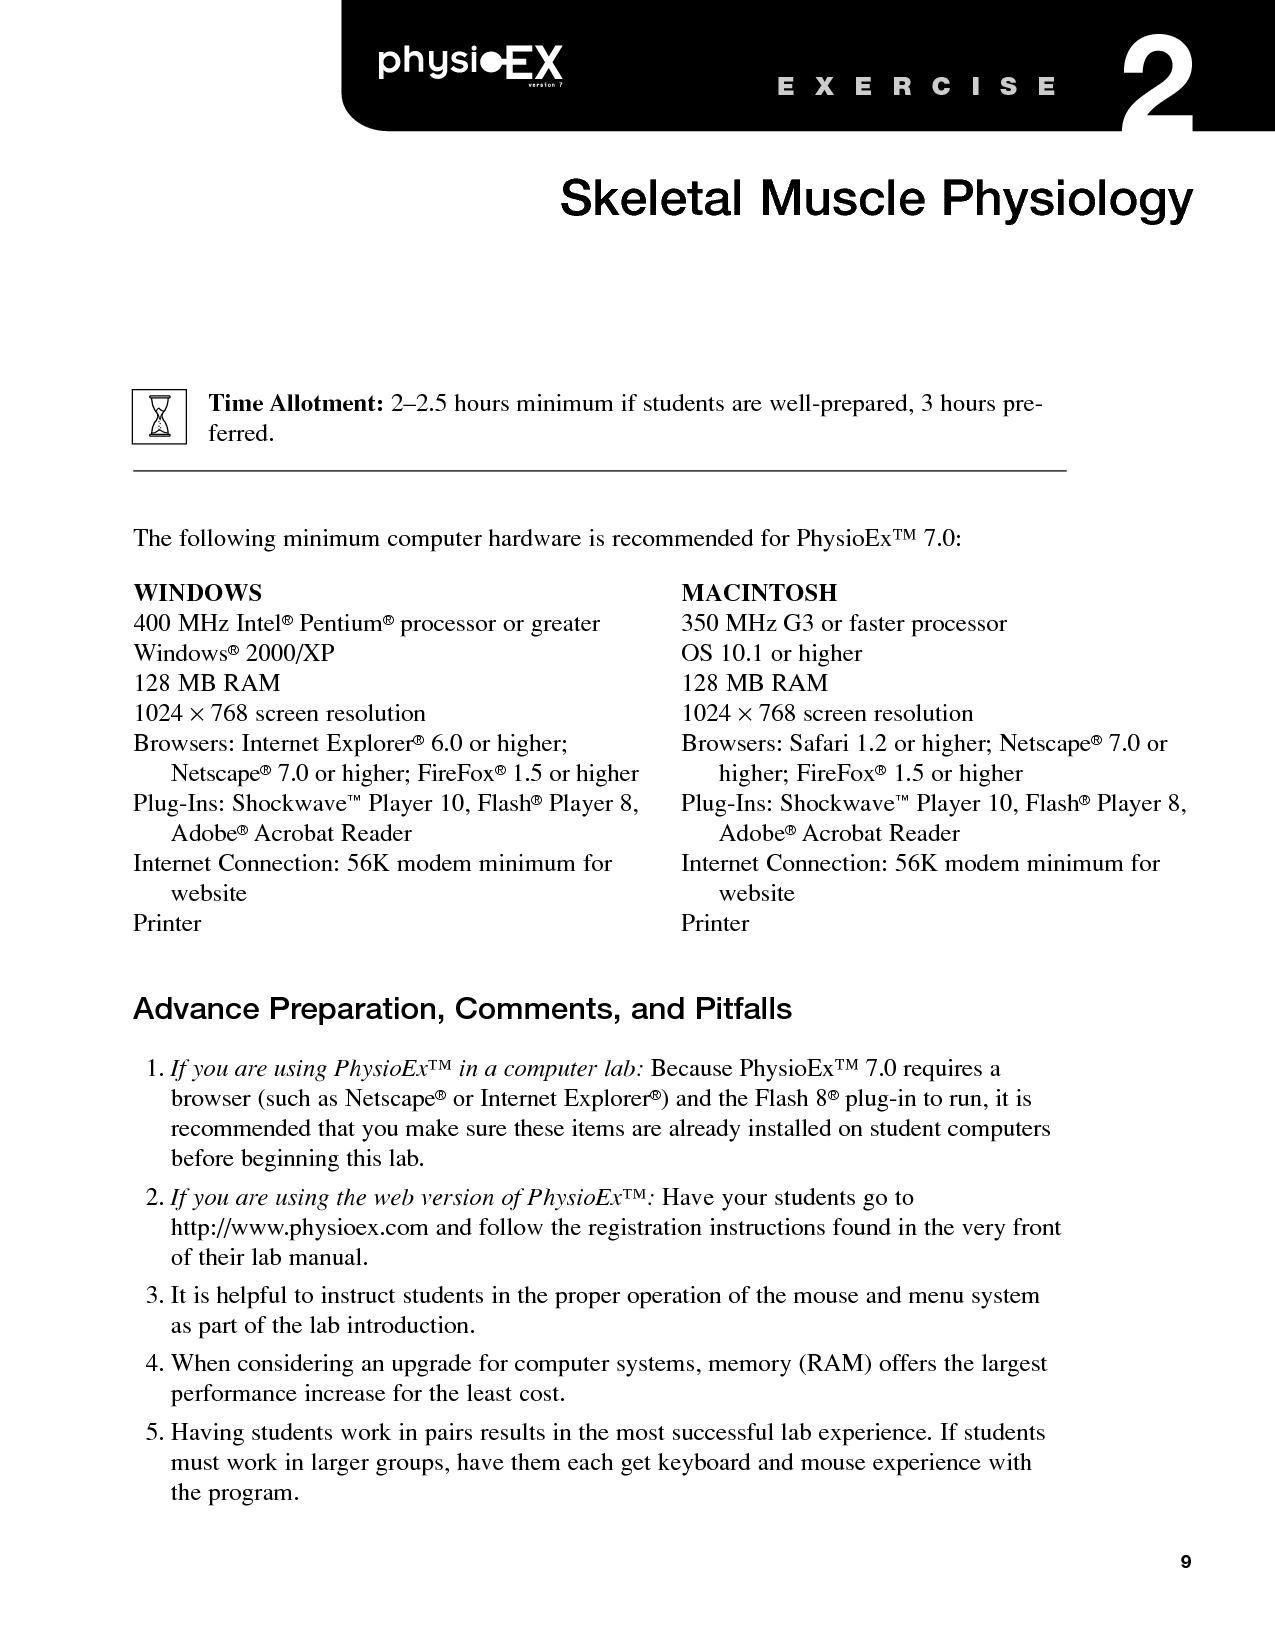 Skeletal Muscle Physiology Exercise 2 Answers